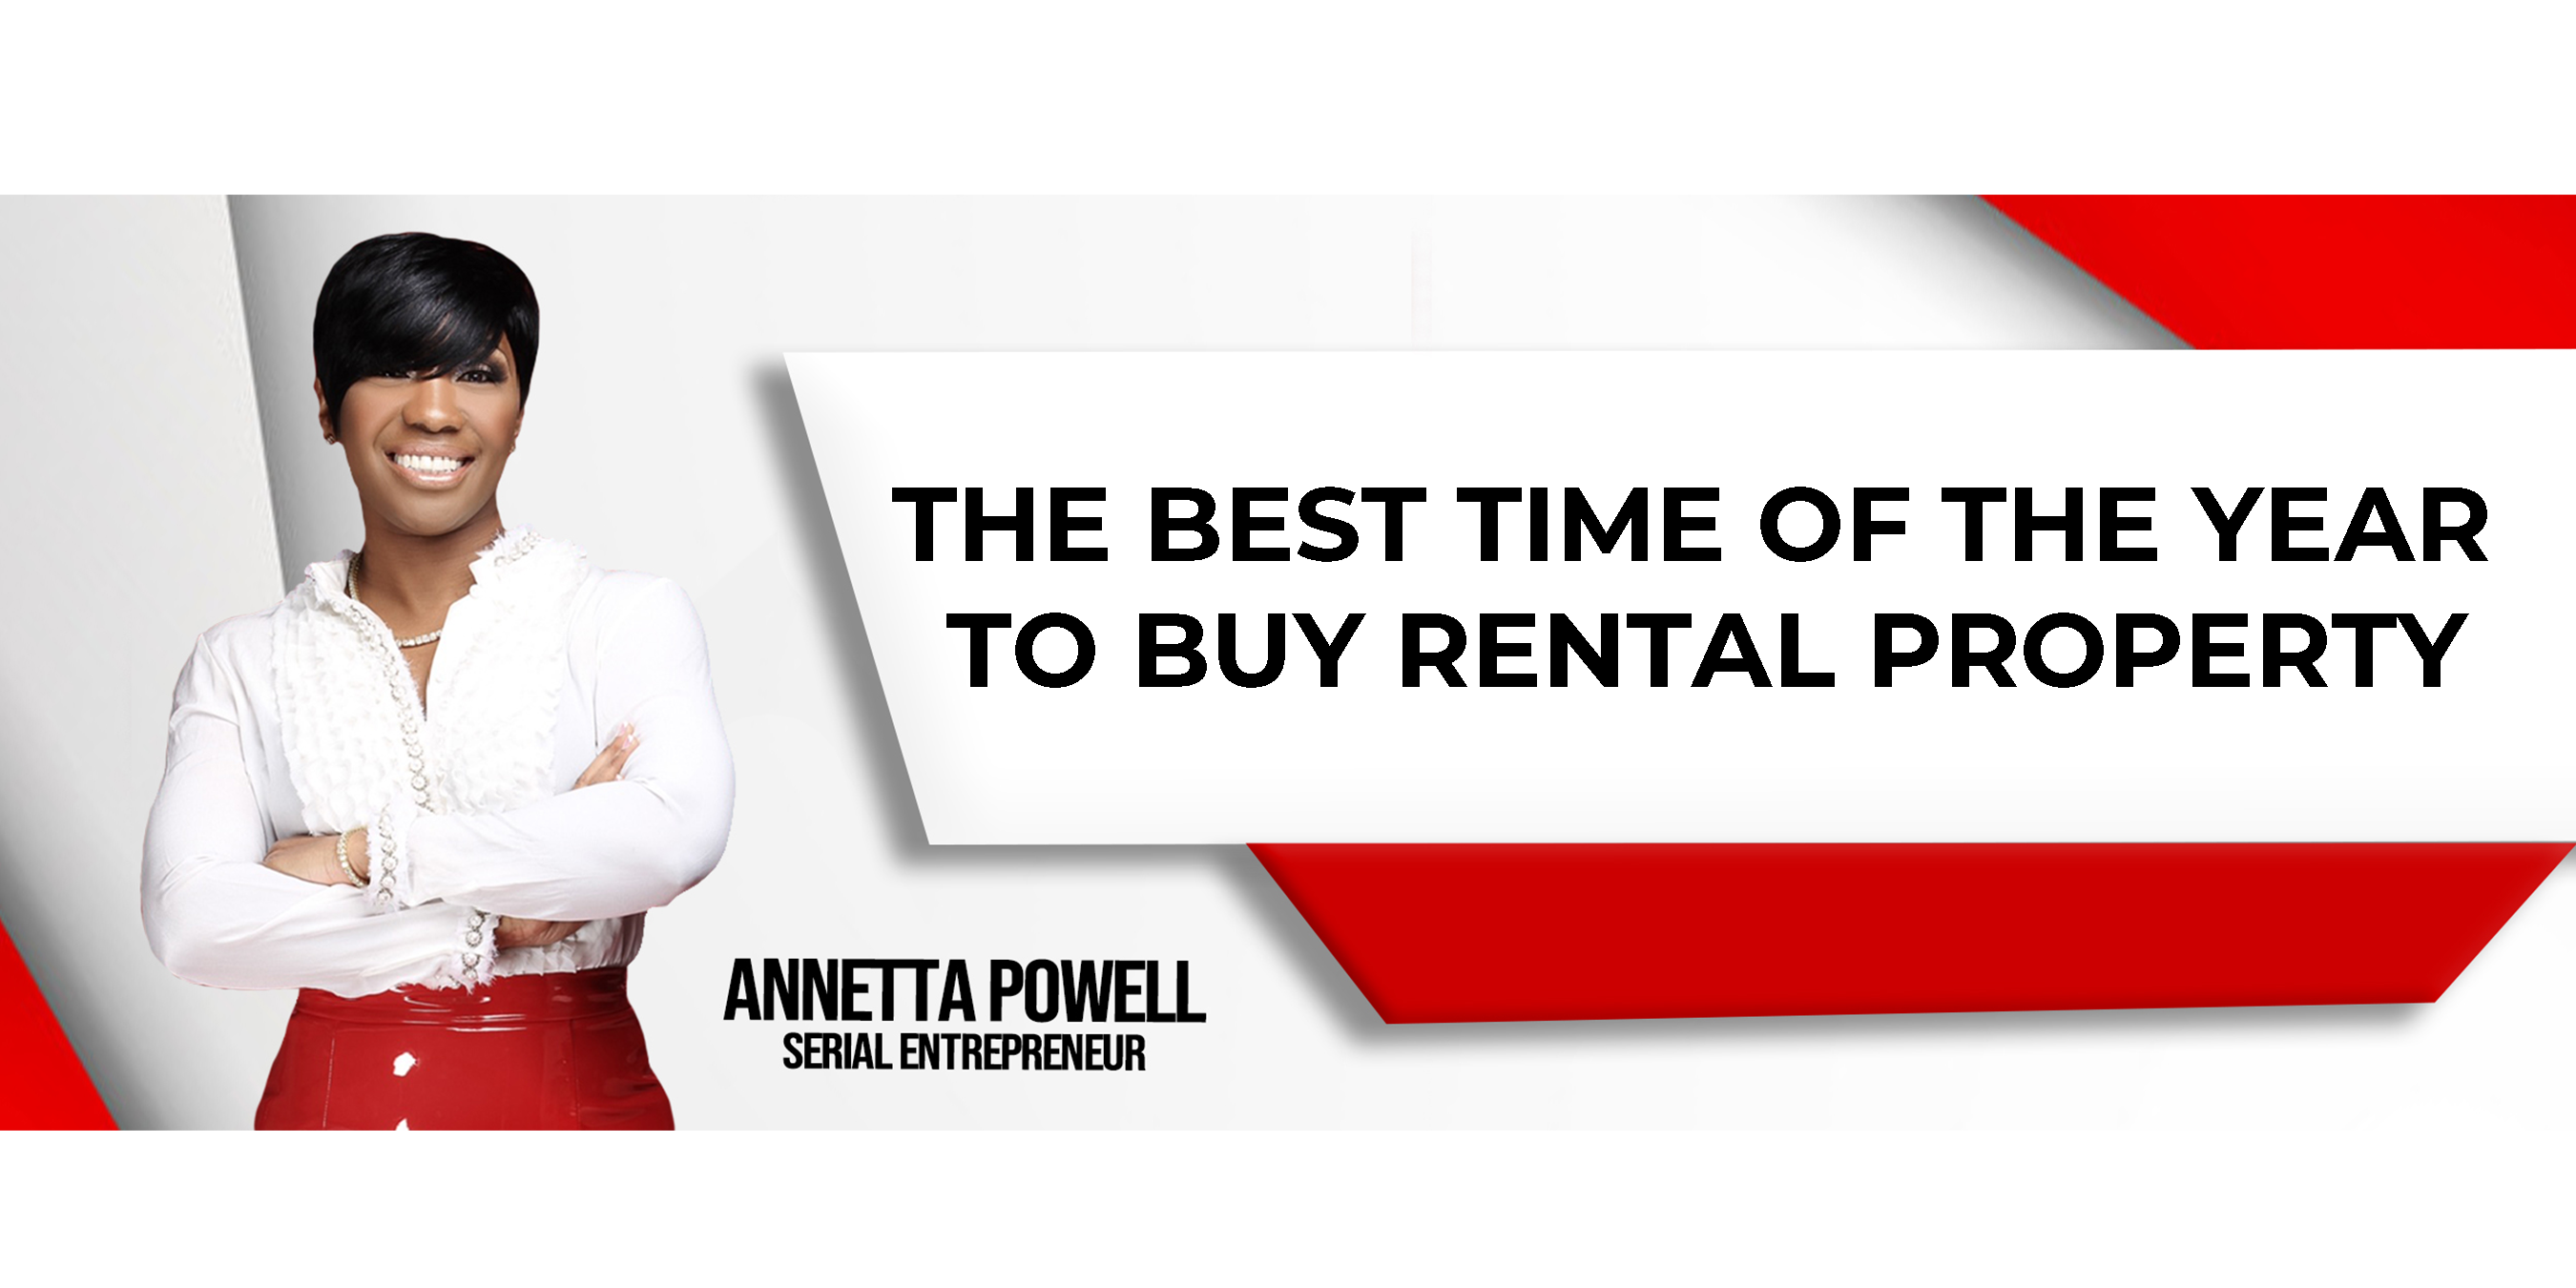 When Is The Best Time Of Year To Buy A Rental Property?